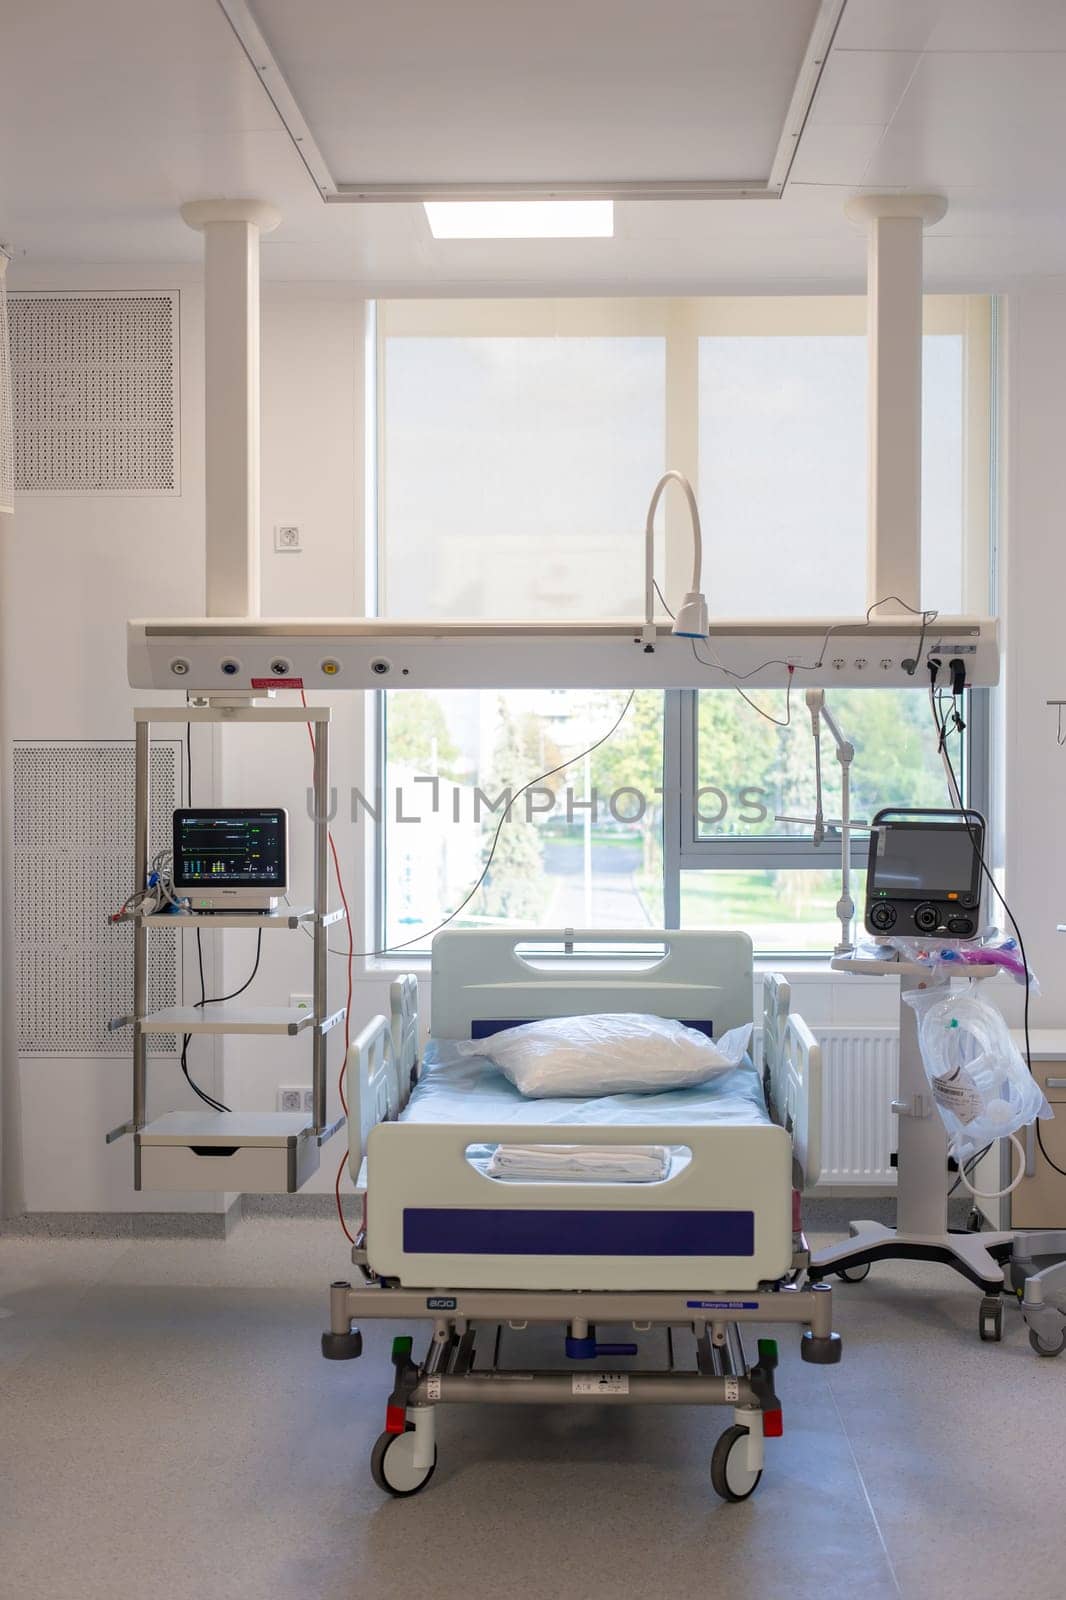 Moscow, Moscow region, Russia - 03.09.2023:A well-equipped hospital room with an empty bed, medical monitors, and various devices.